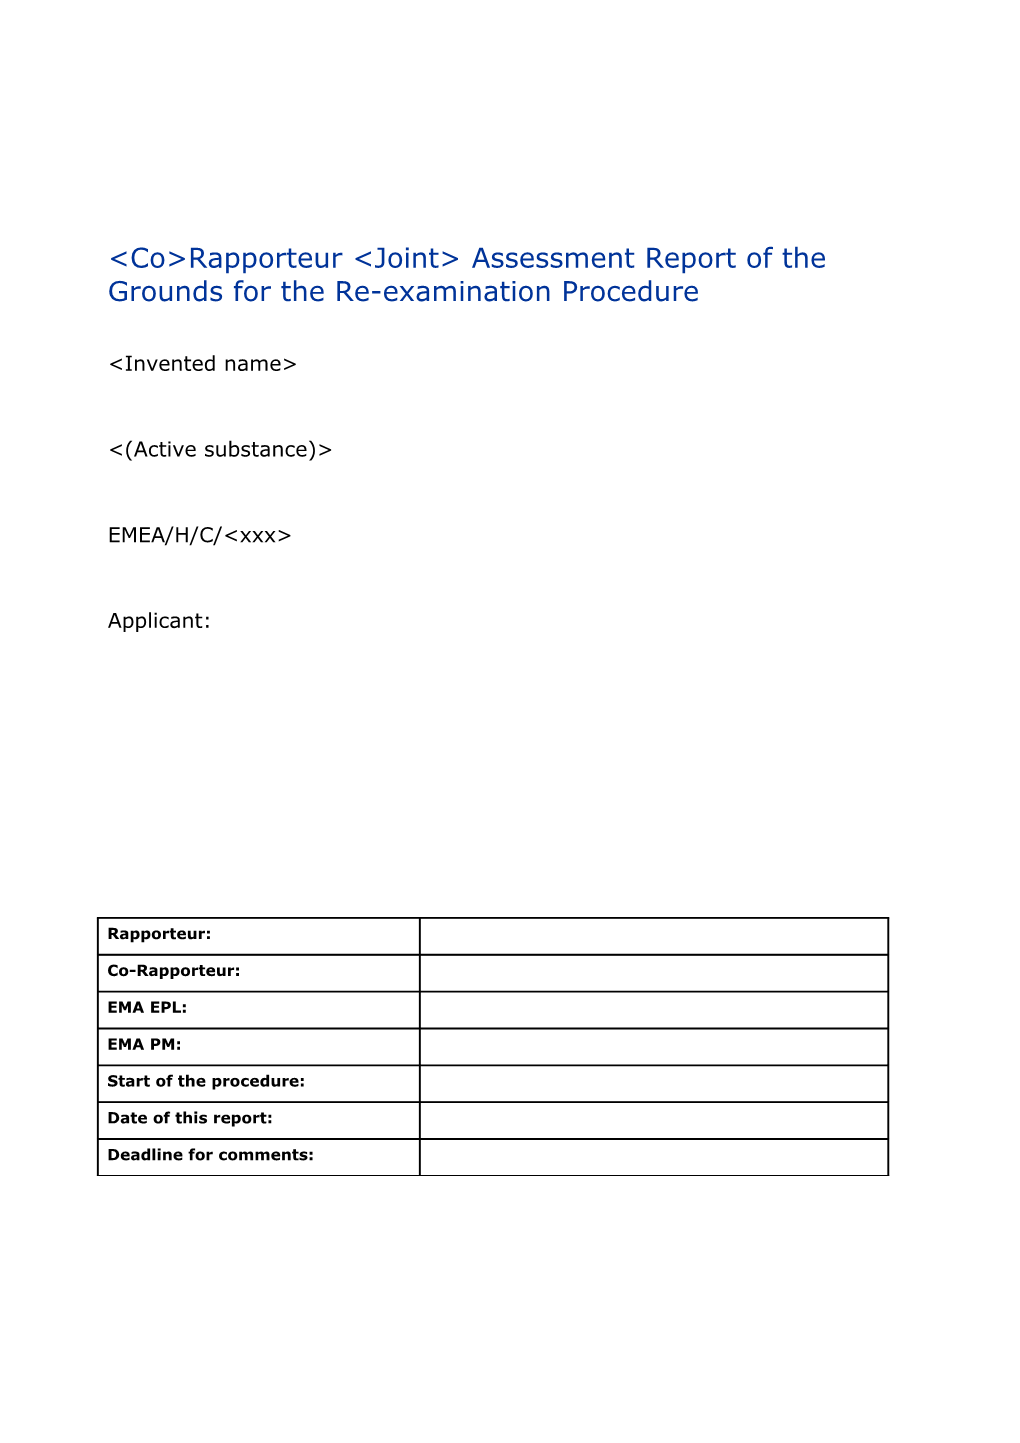 (Co)-Rapp JAR of the Grounds for Re-Examination Template Rev 06.17